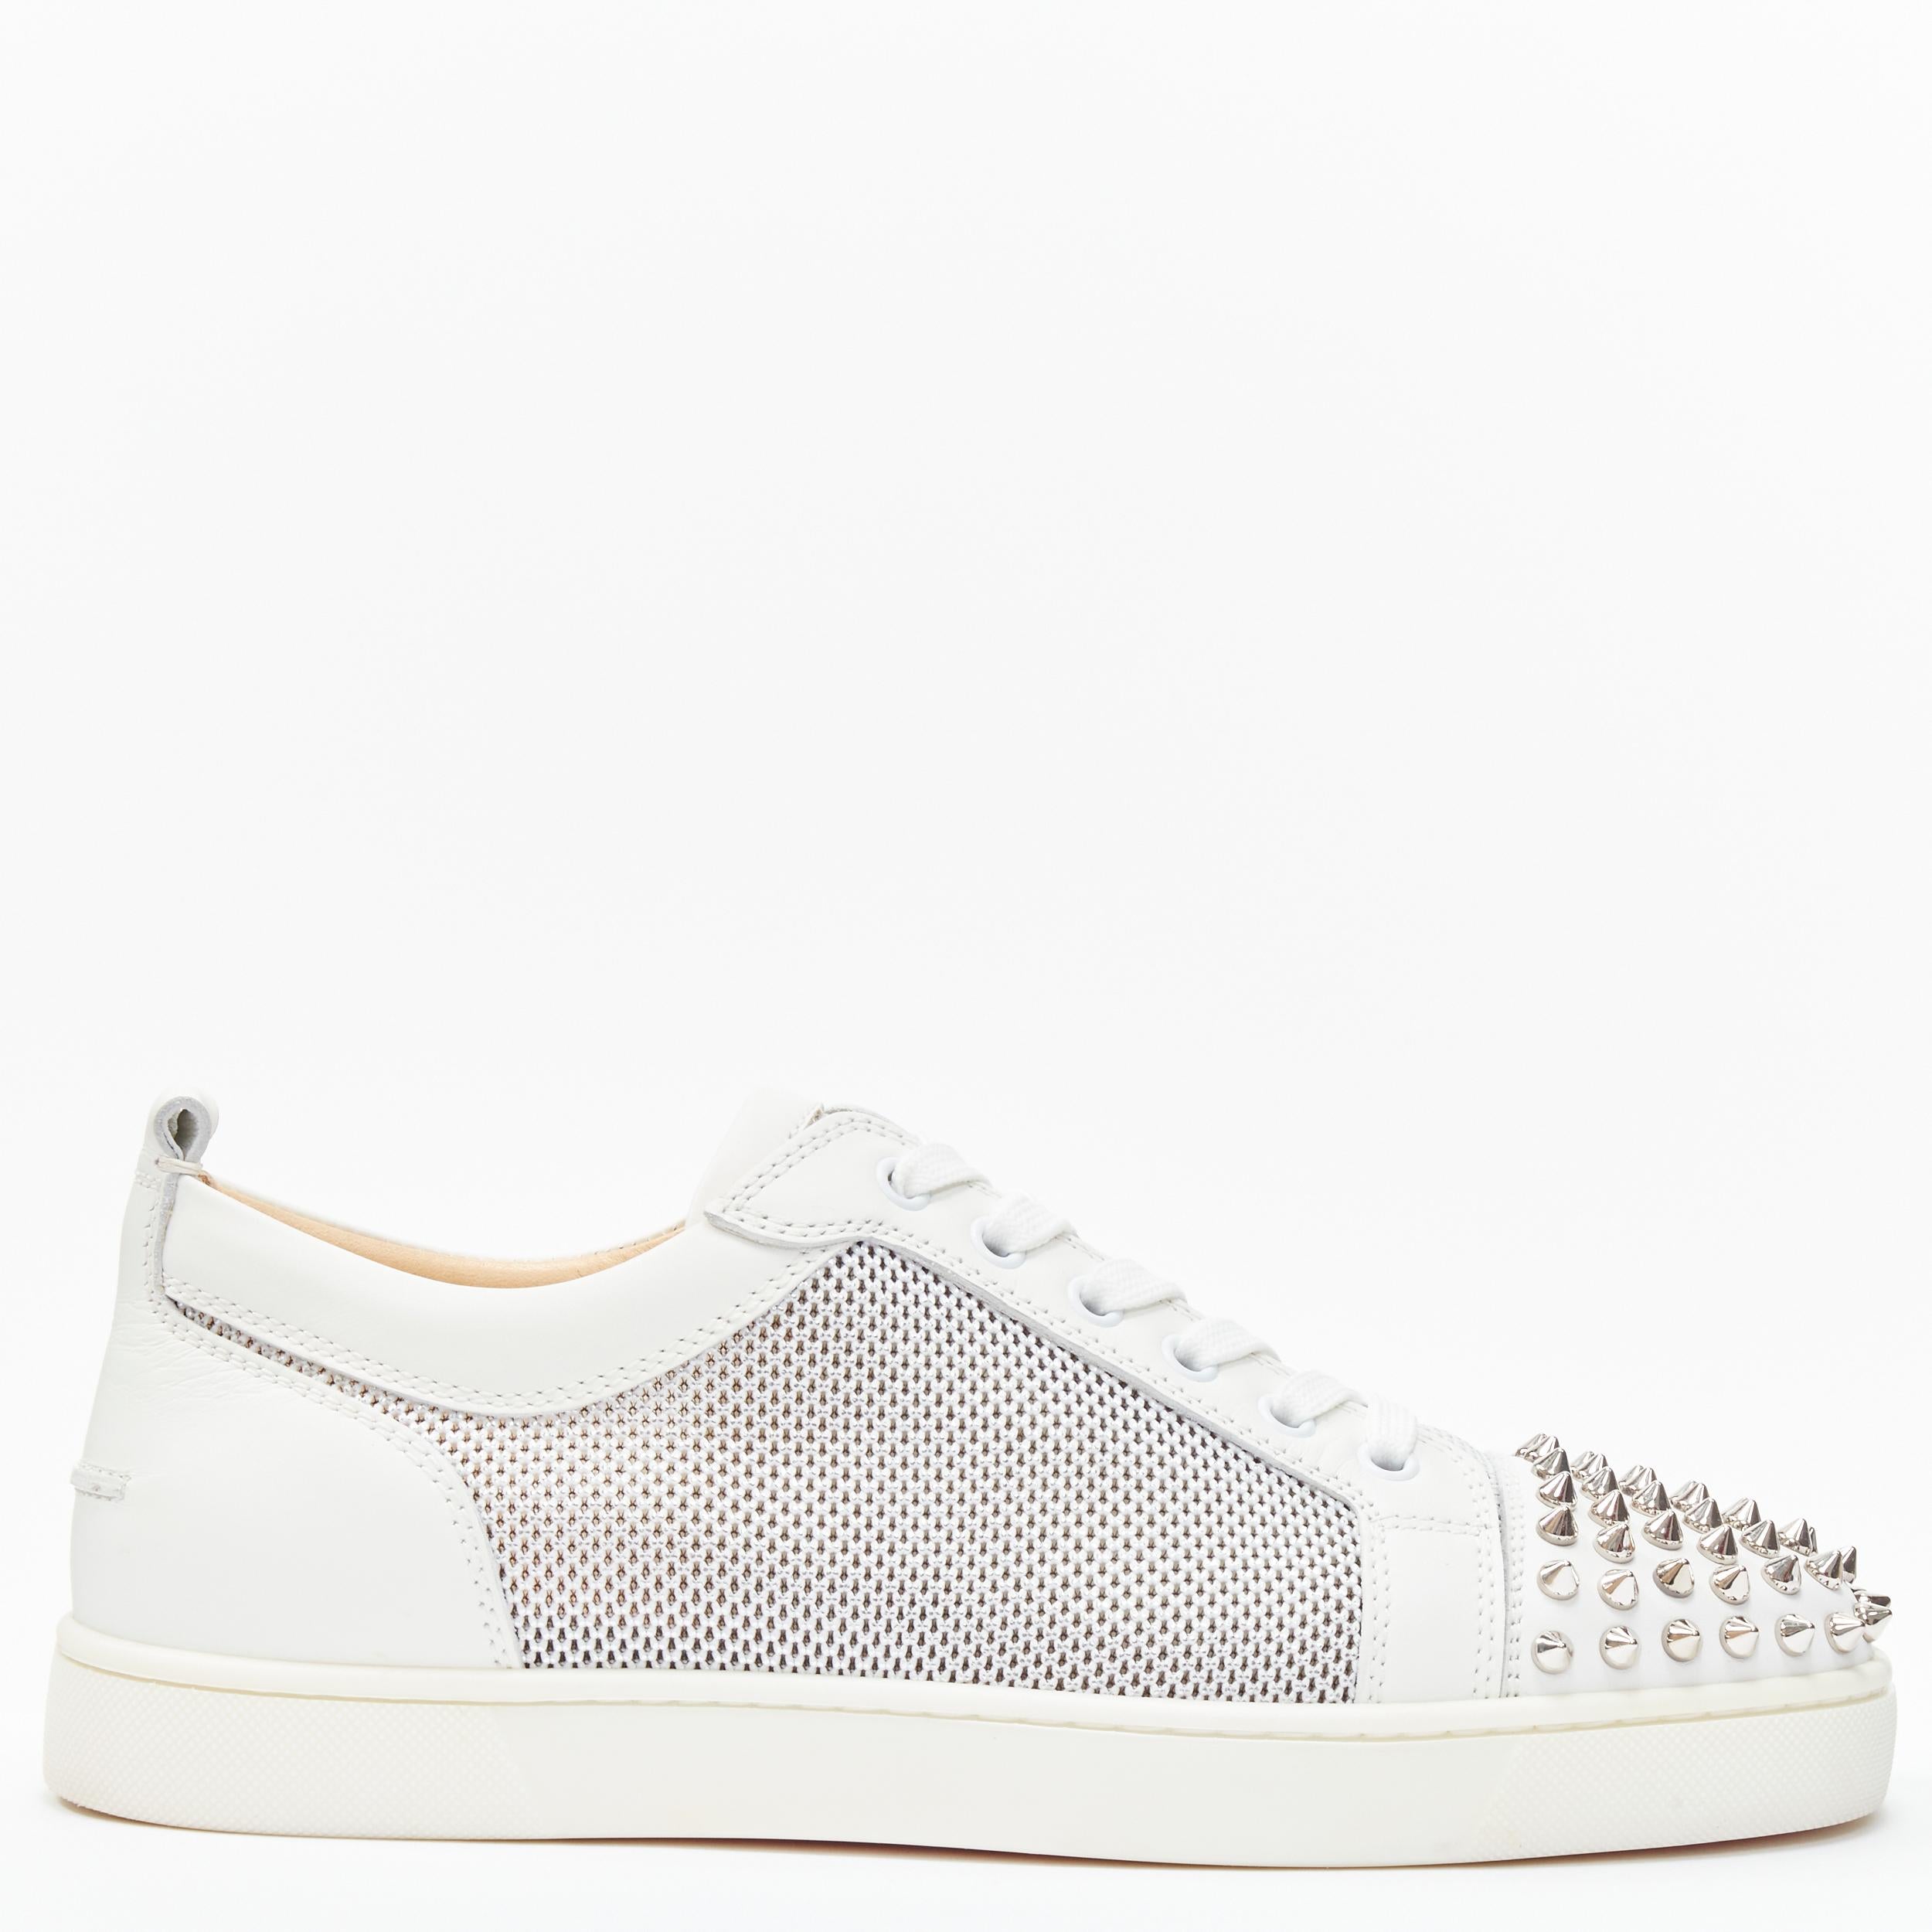 new CHRISTIAN LOUBOUTIN Louis Junior Spikes white silver low top sneakers EU40.5 
Reference: TGAS/B01848 
Brand: Christian Louboutin 
Designer: Christian Louboutin 
Model: Louis Junior Spikes 
Material: Leather 
Color: White 
Pattern: Solid Extra